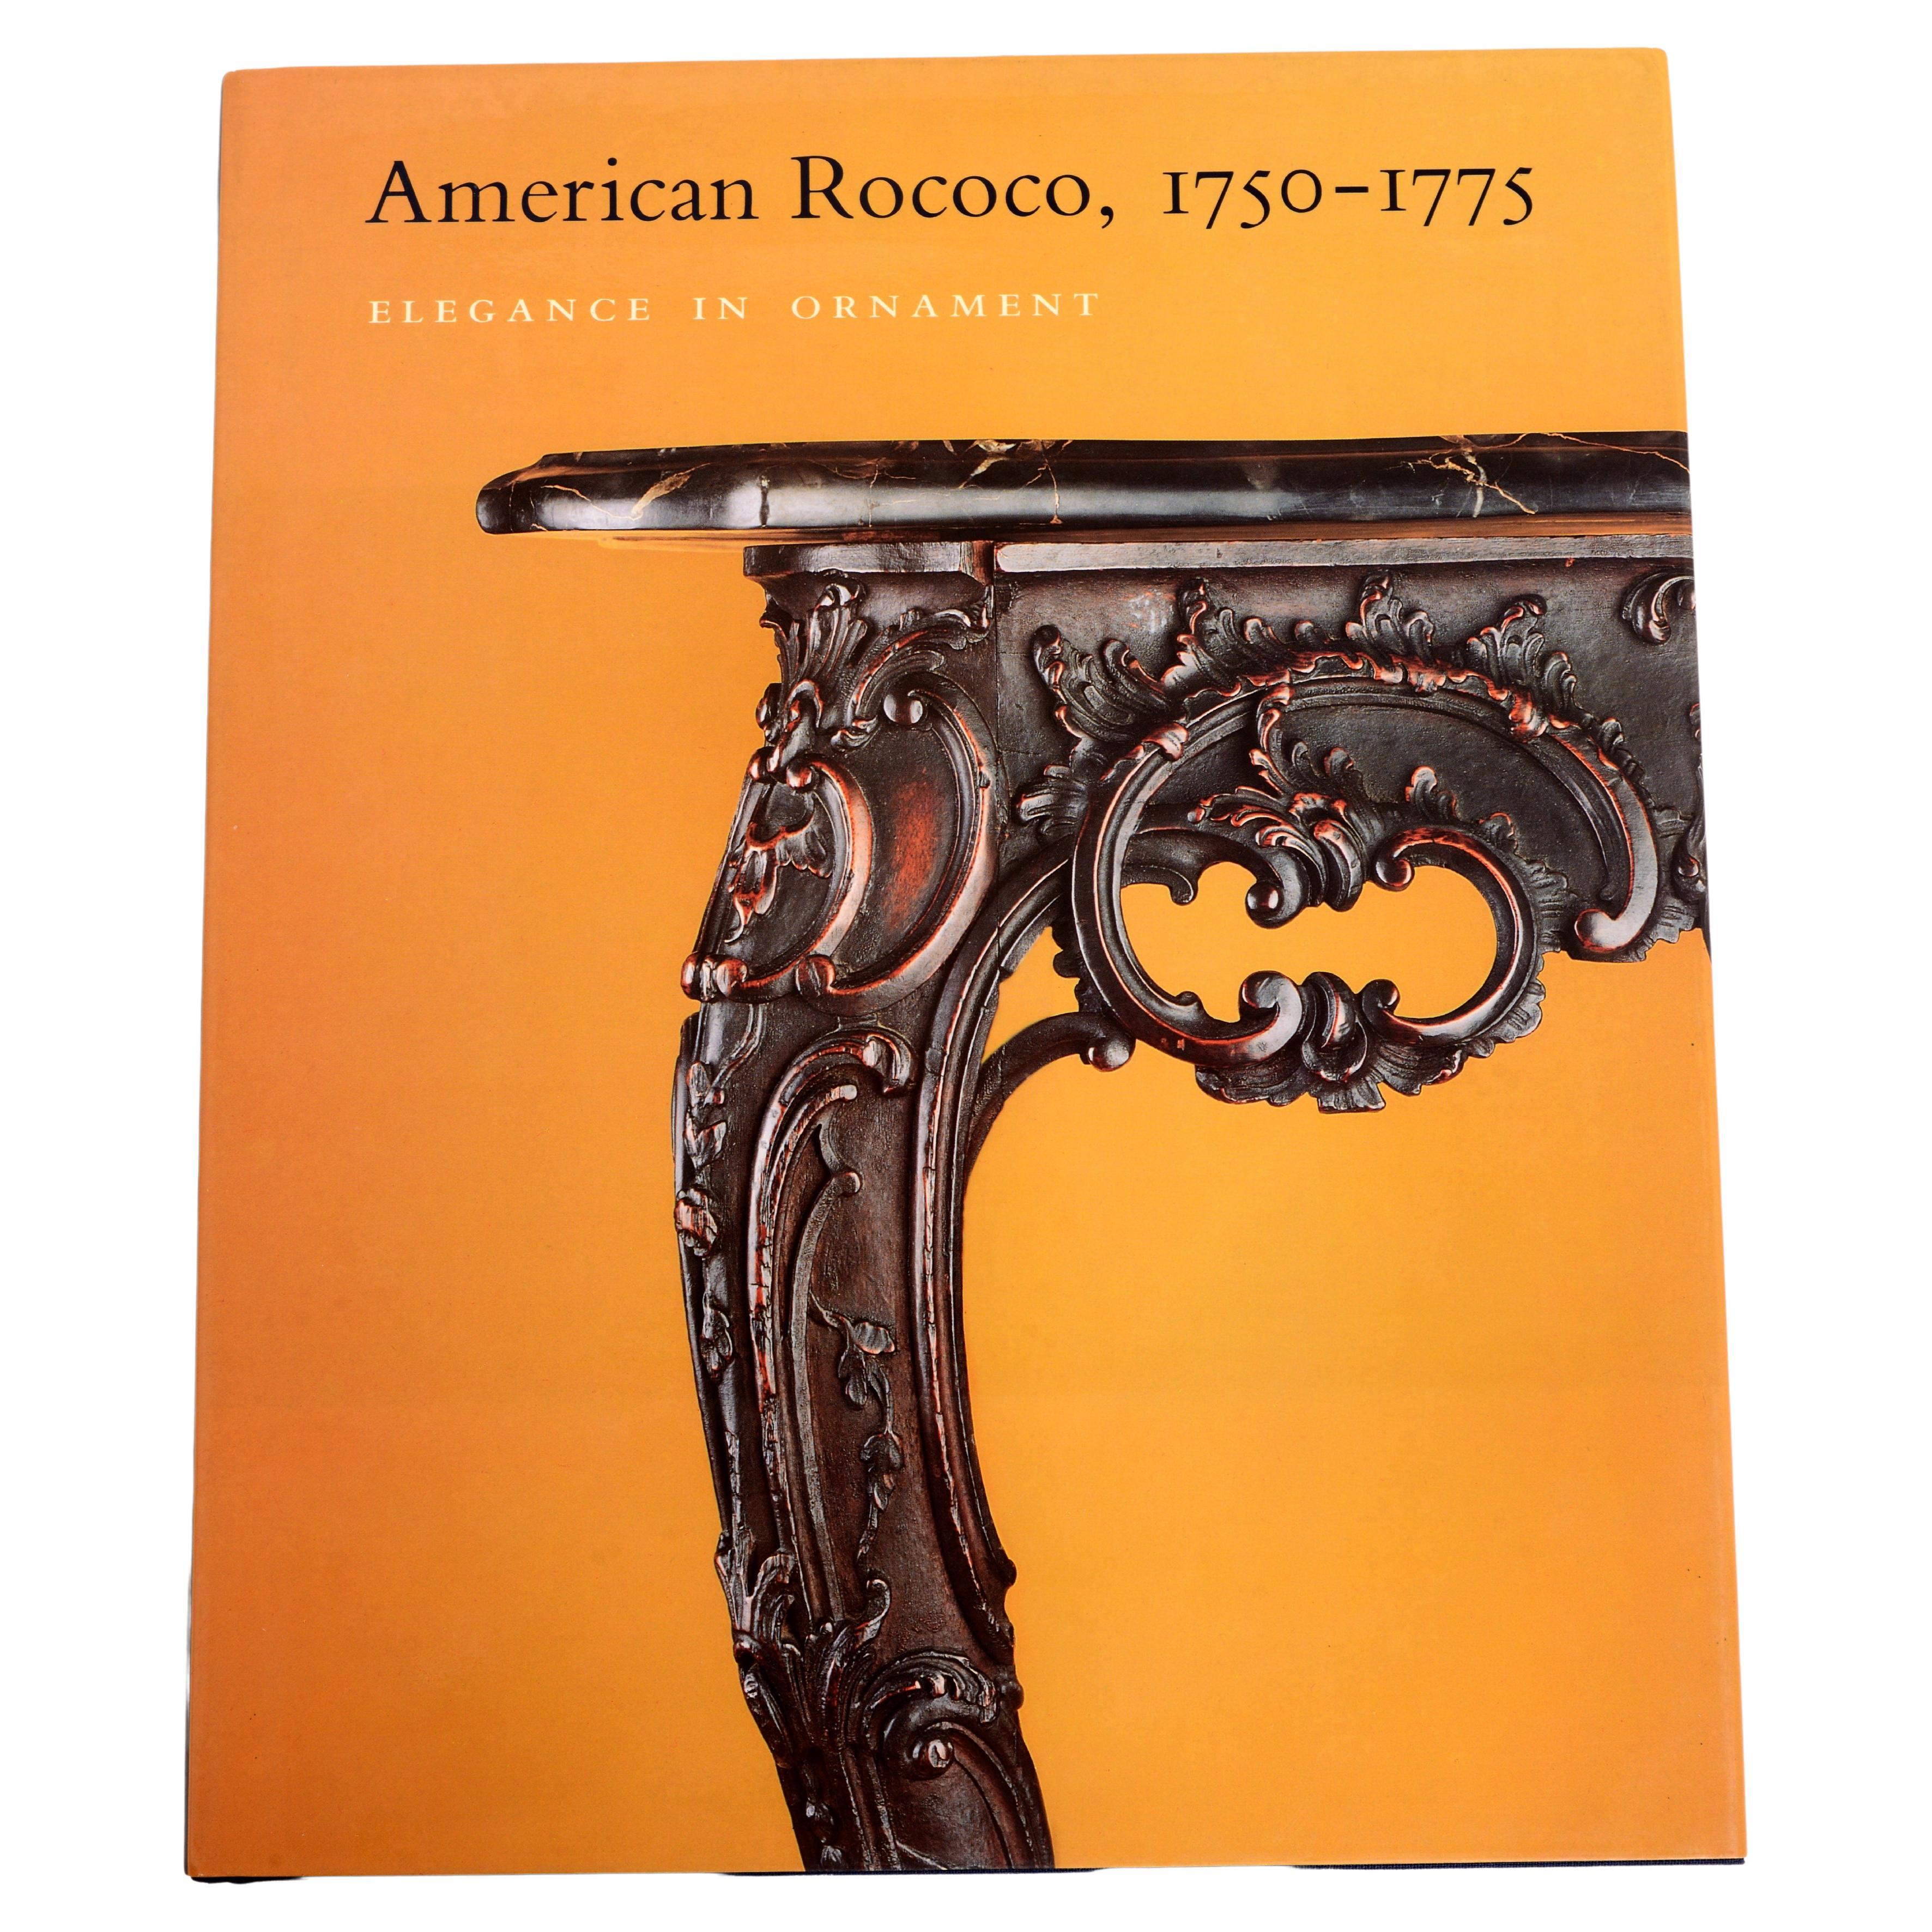 American Rococo, 1750-1775: Elegance in Ornament by Morrison Heckscher, 1st Ed For Sale